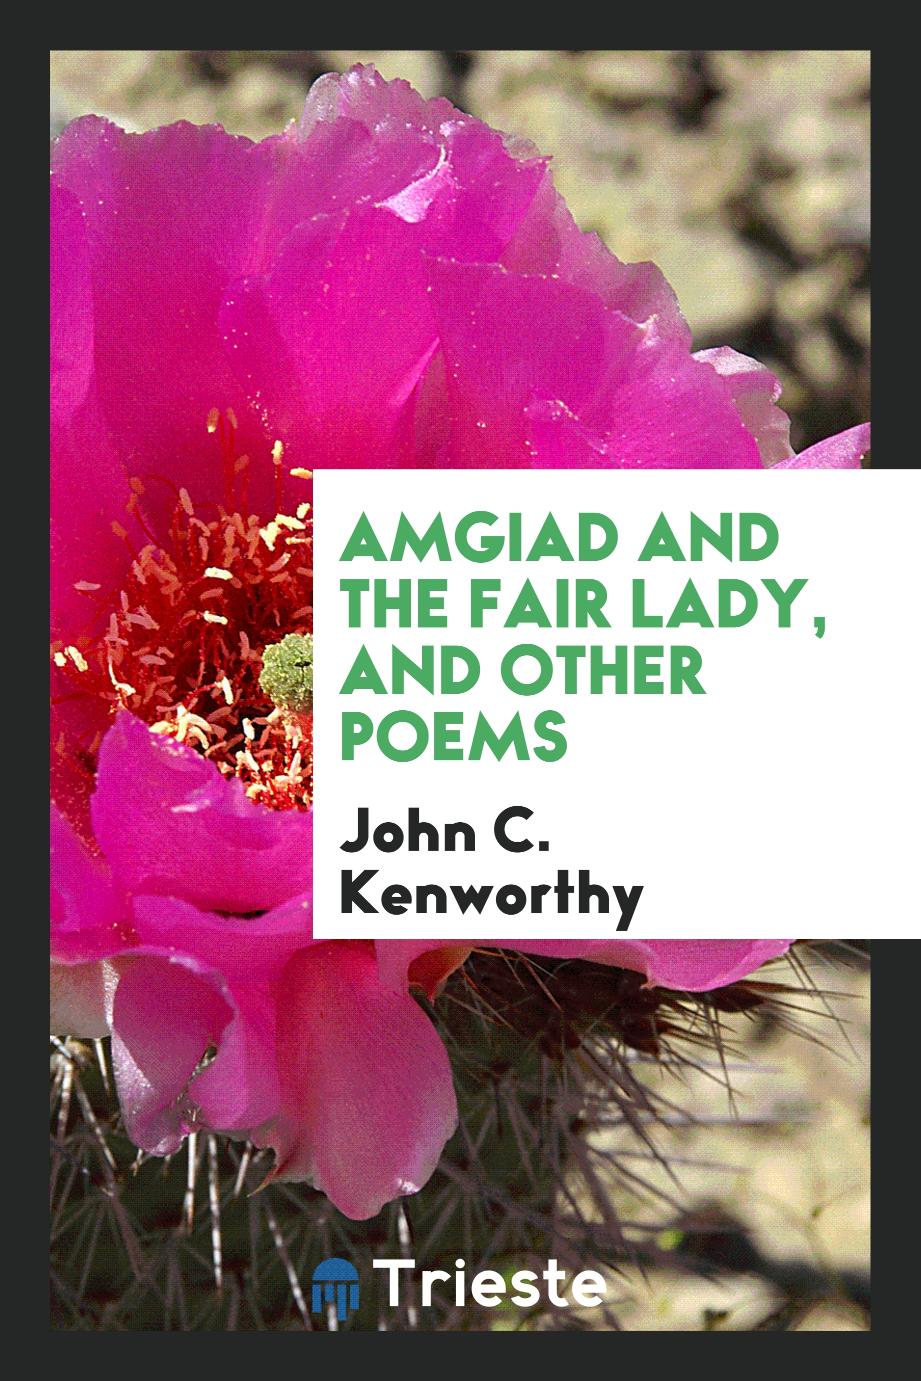 Amgiad and the Fair Lady, and Other Poems